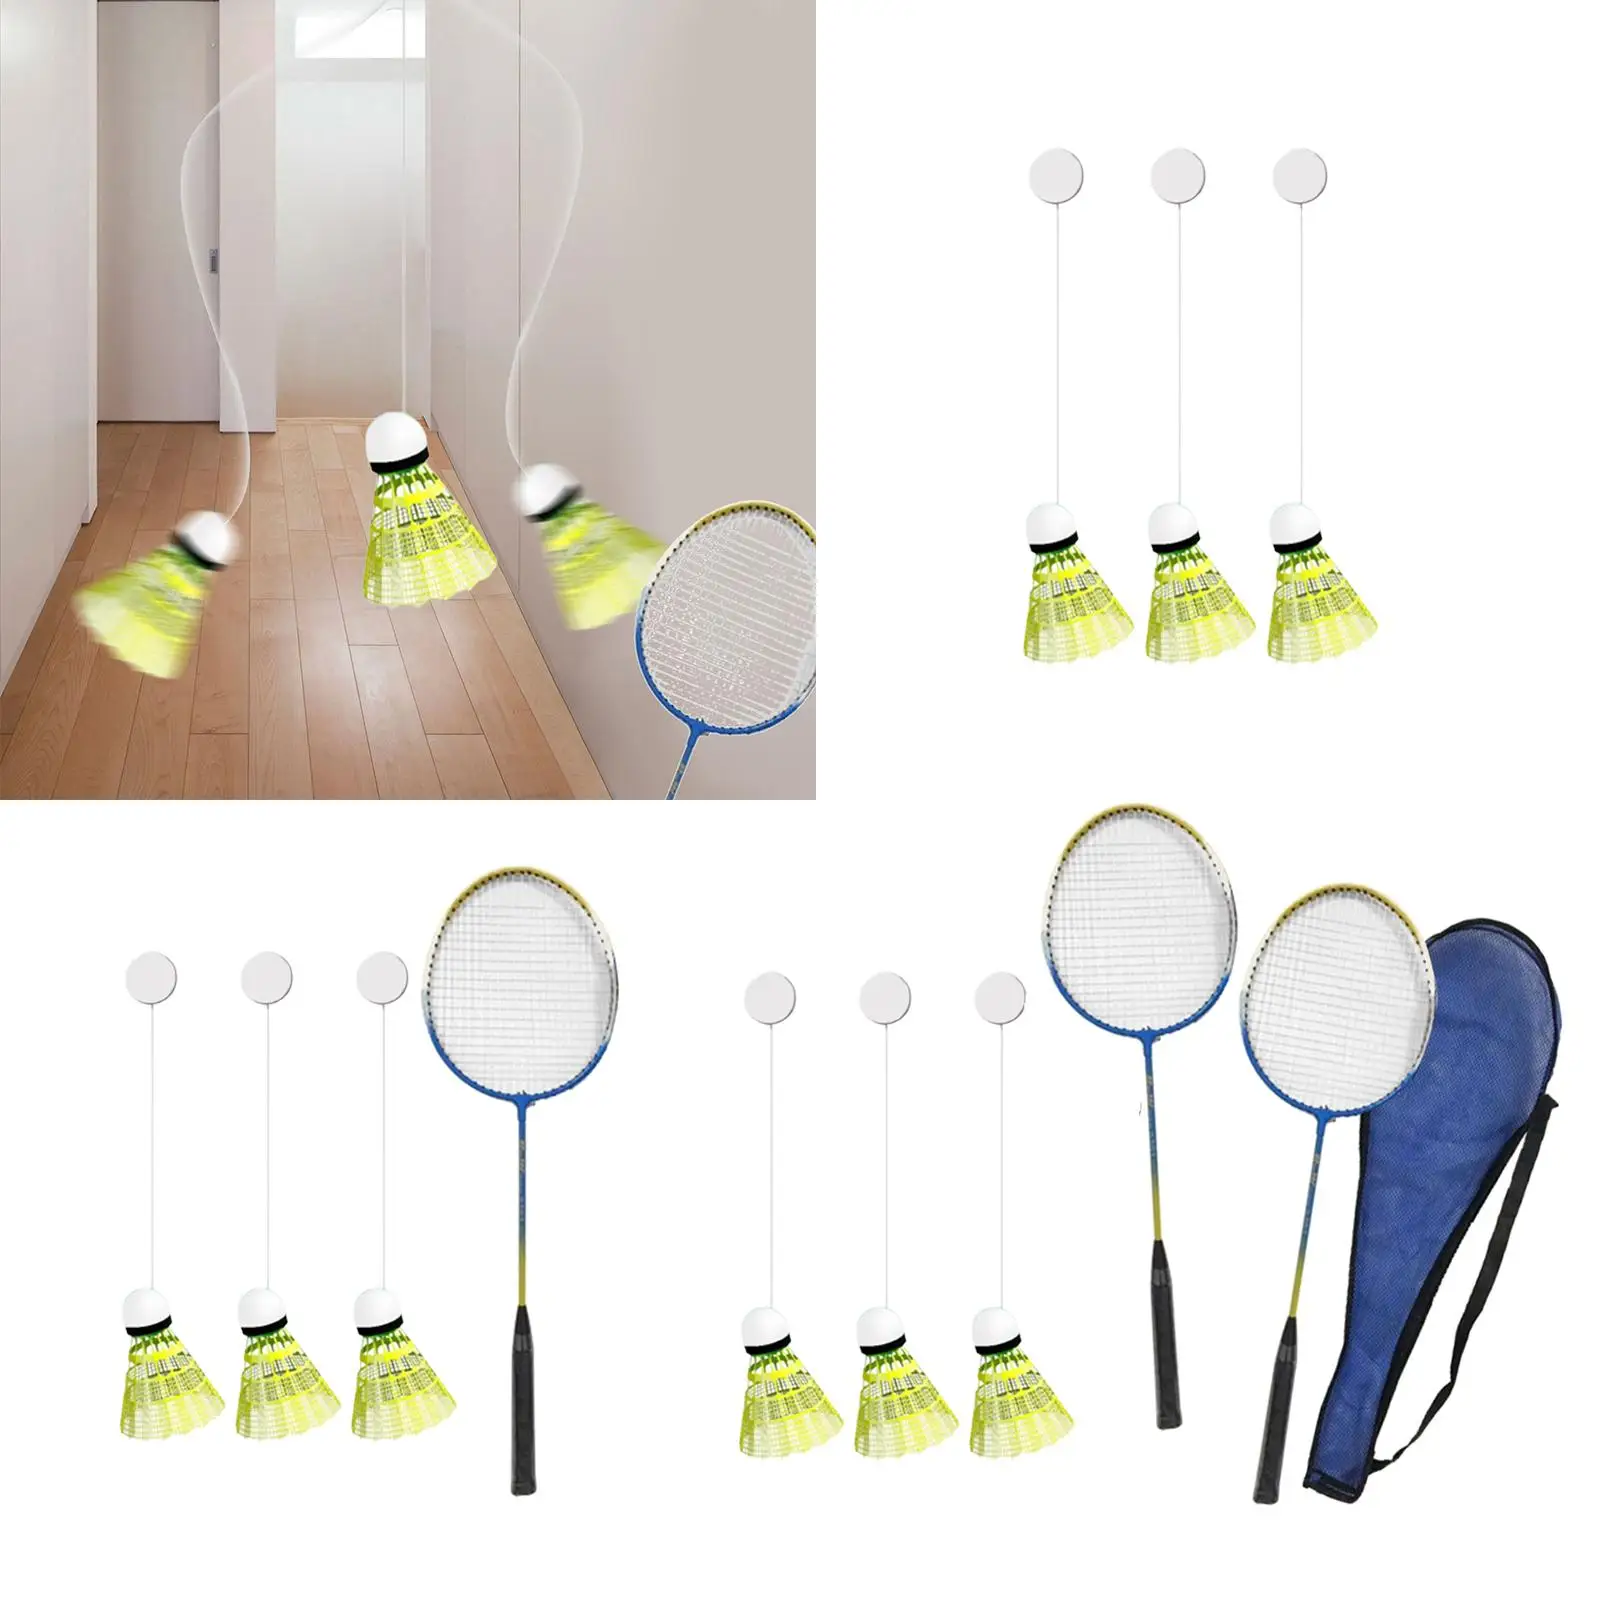 Indoor Badminton Trainer Strength Training Training Device Tool with Badminton Badminton Training for Fitness Exercise Sports